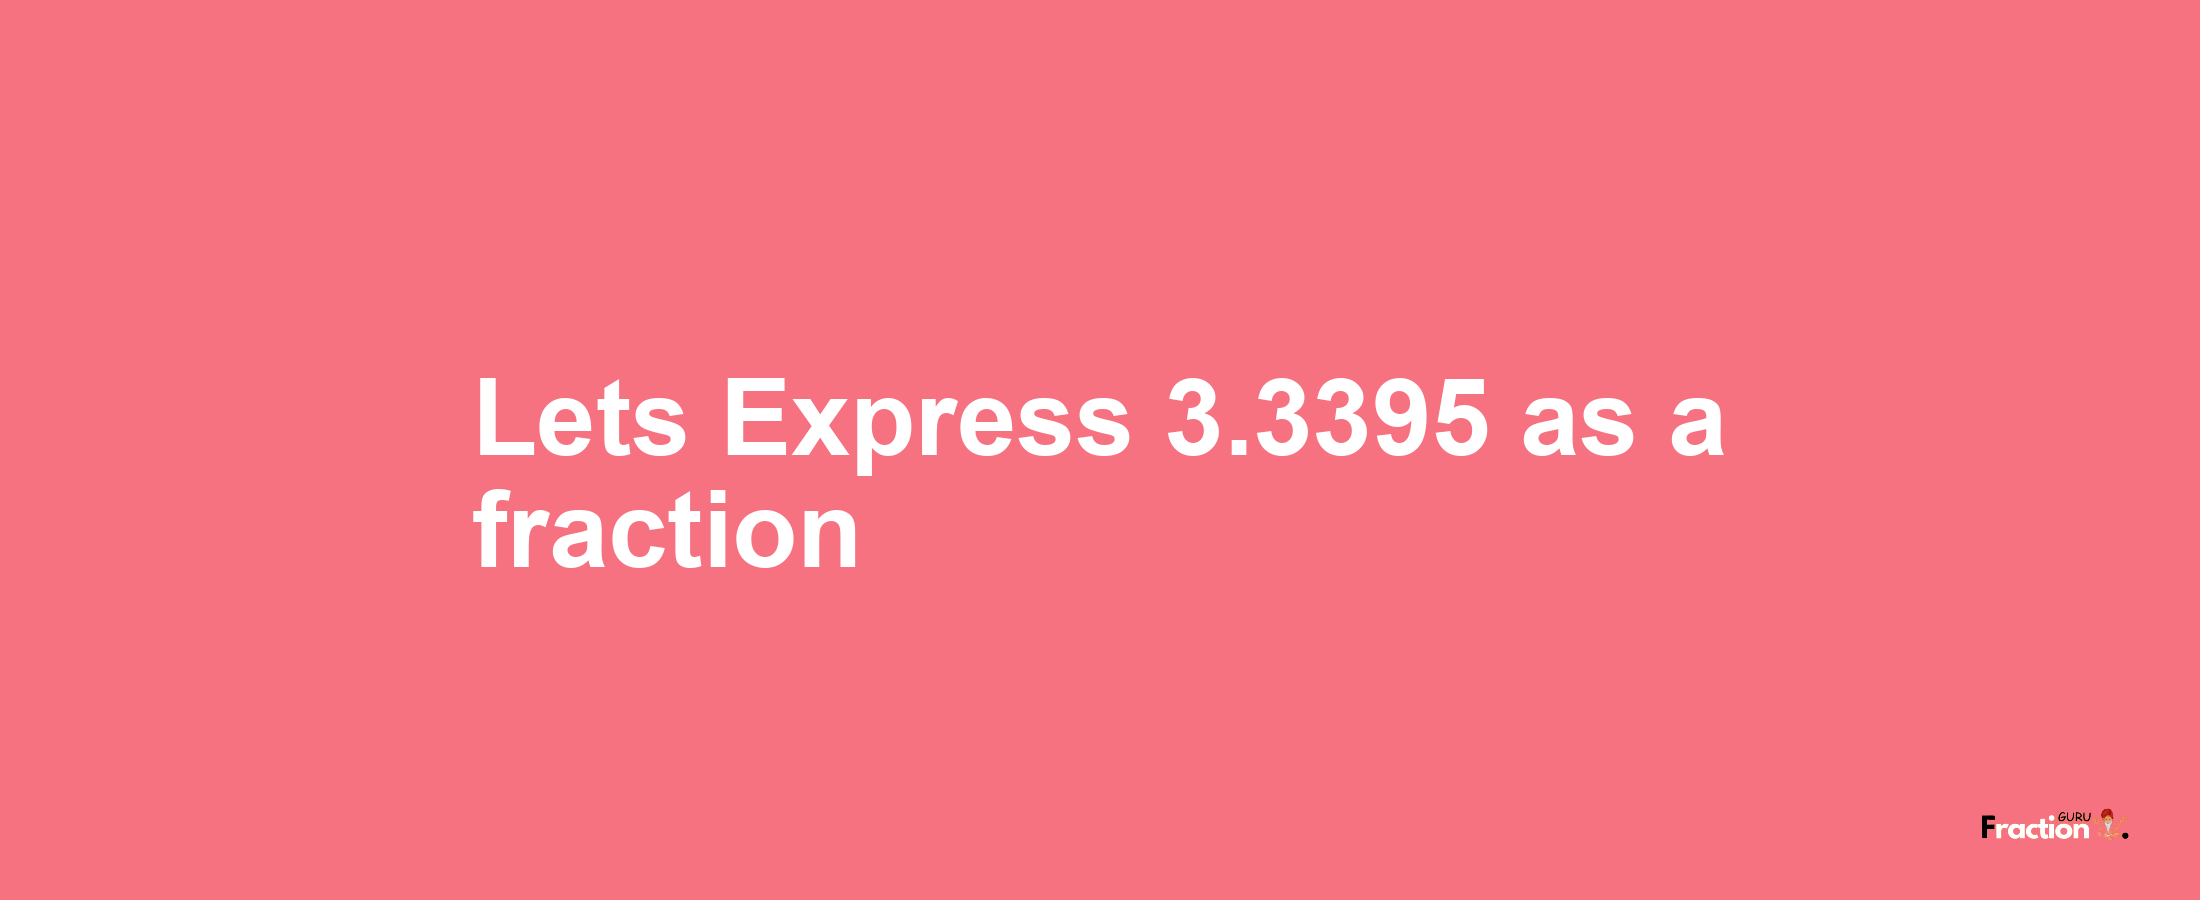 Lets Express 3.3395 as afraction